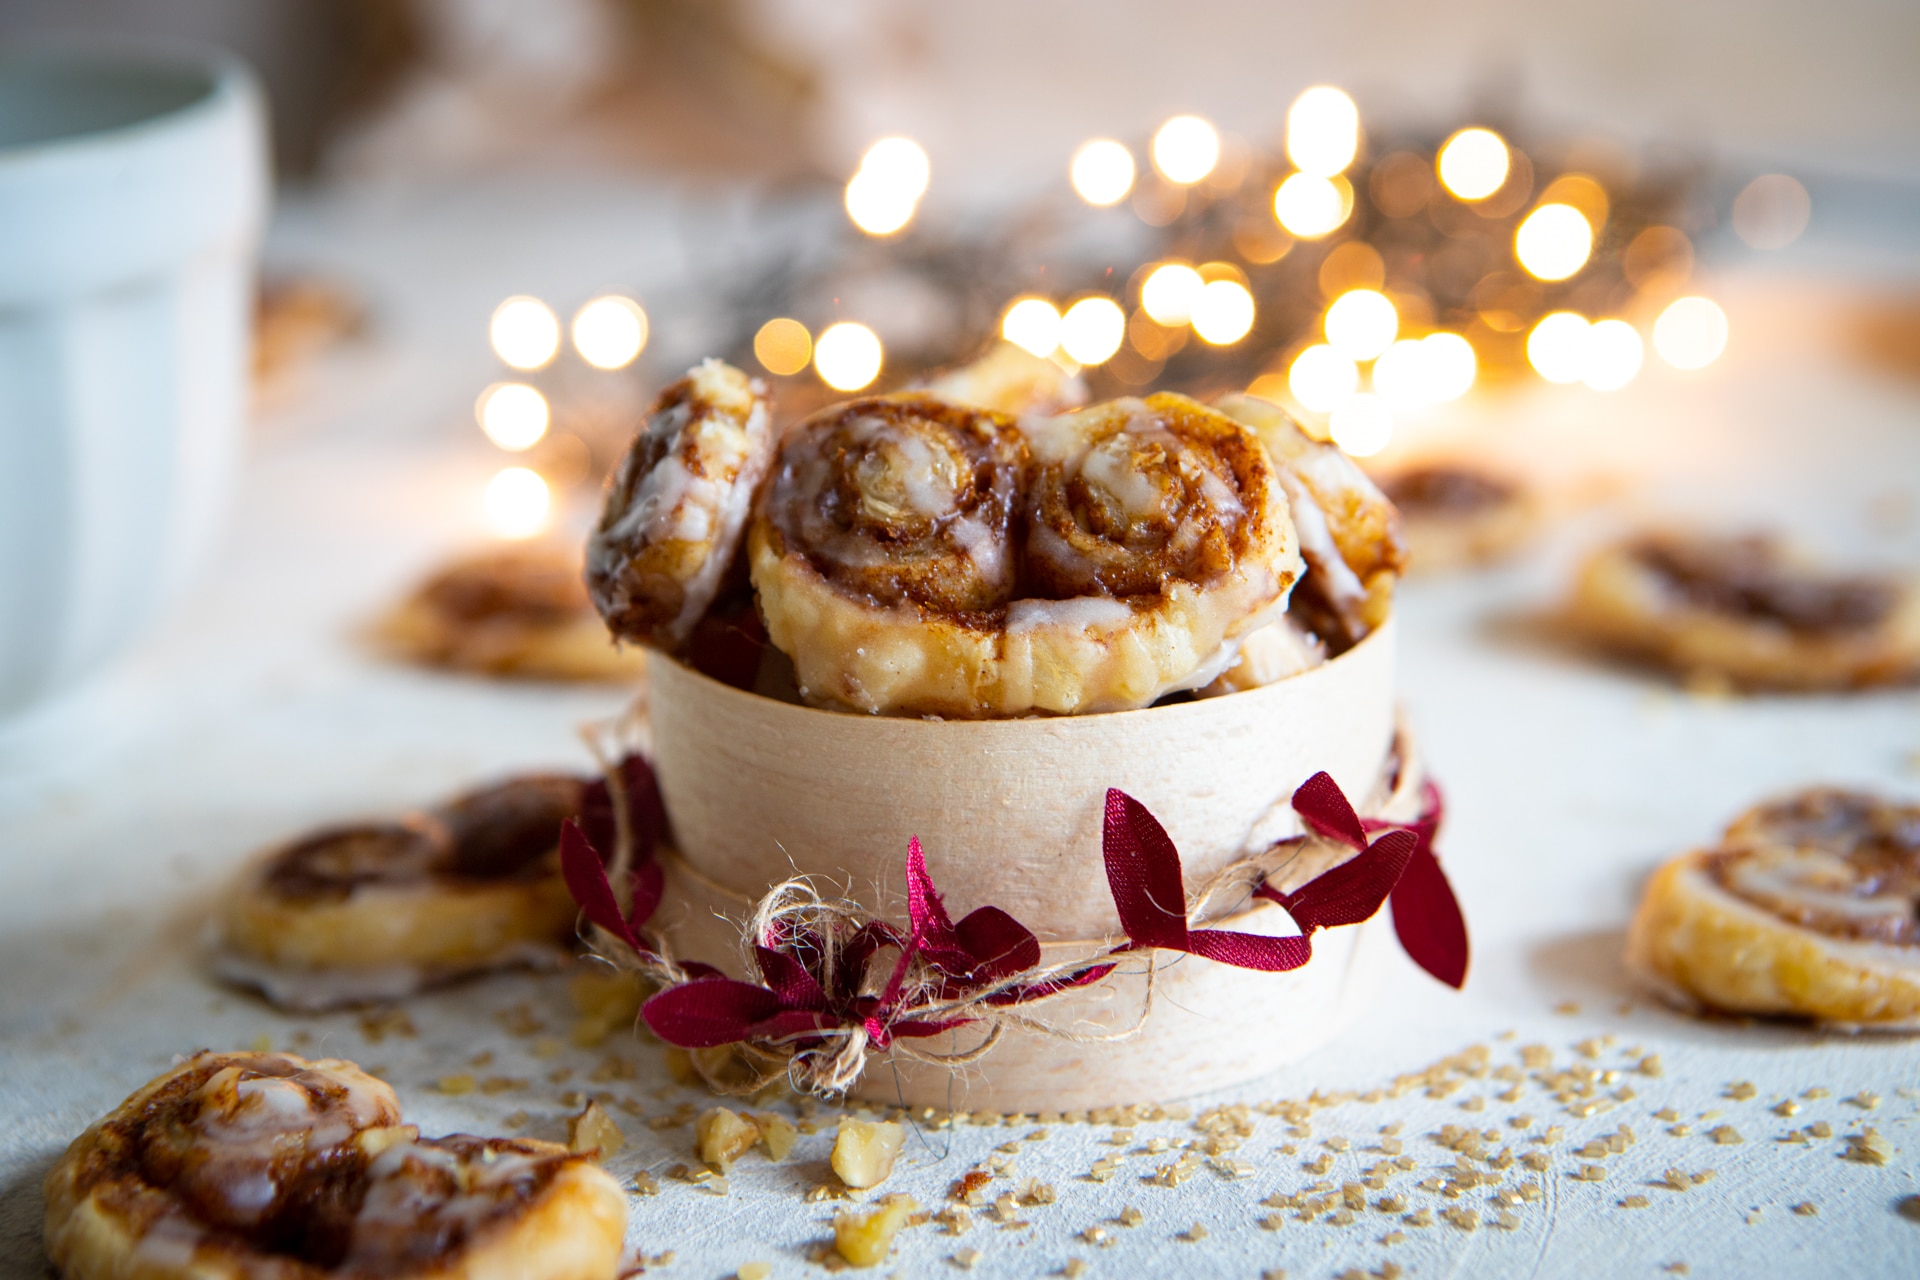 A festive tub of baked cinnamon roll palmiers with a few individual palmiers laid out and lights in the background.